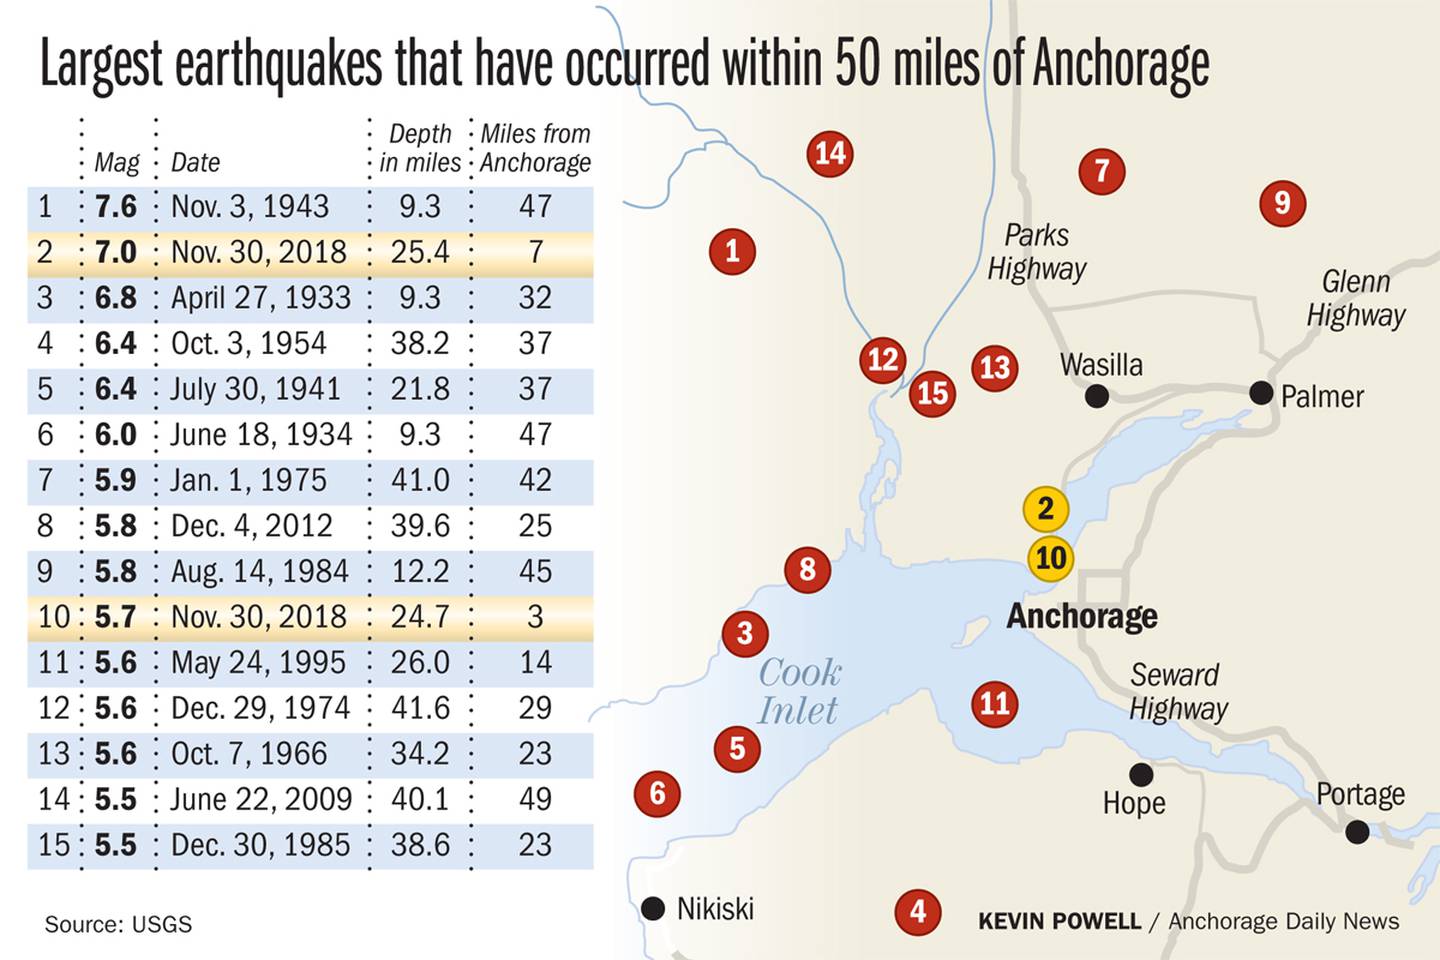 Largest earthquakes near Anchorage